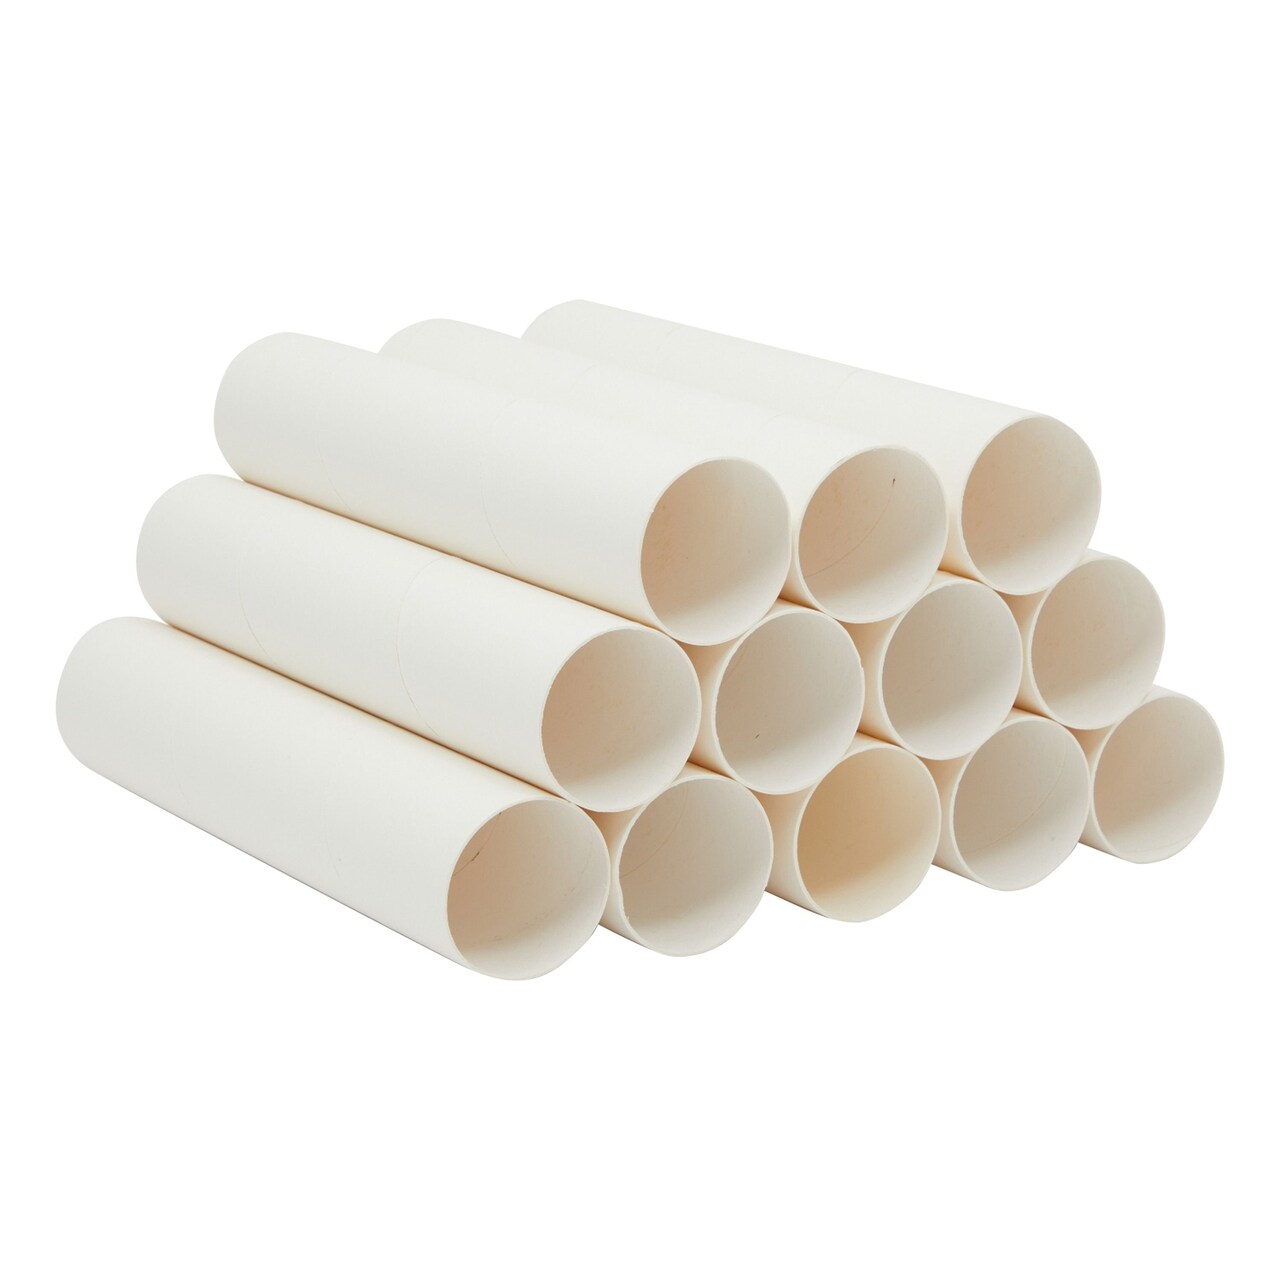 12 Rolls Cardboard Tubes for Crafts,&#x202F;DIY, Classroom Projects, &#x202F;8 Inches, White